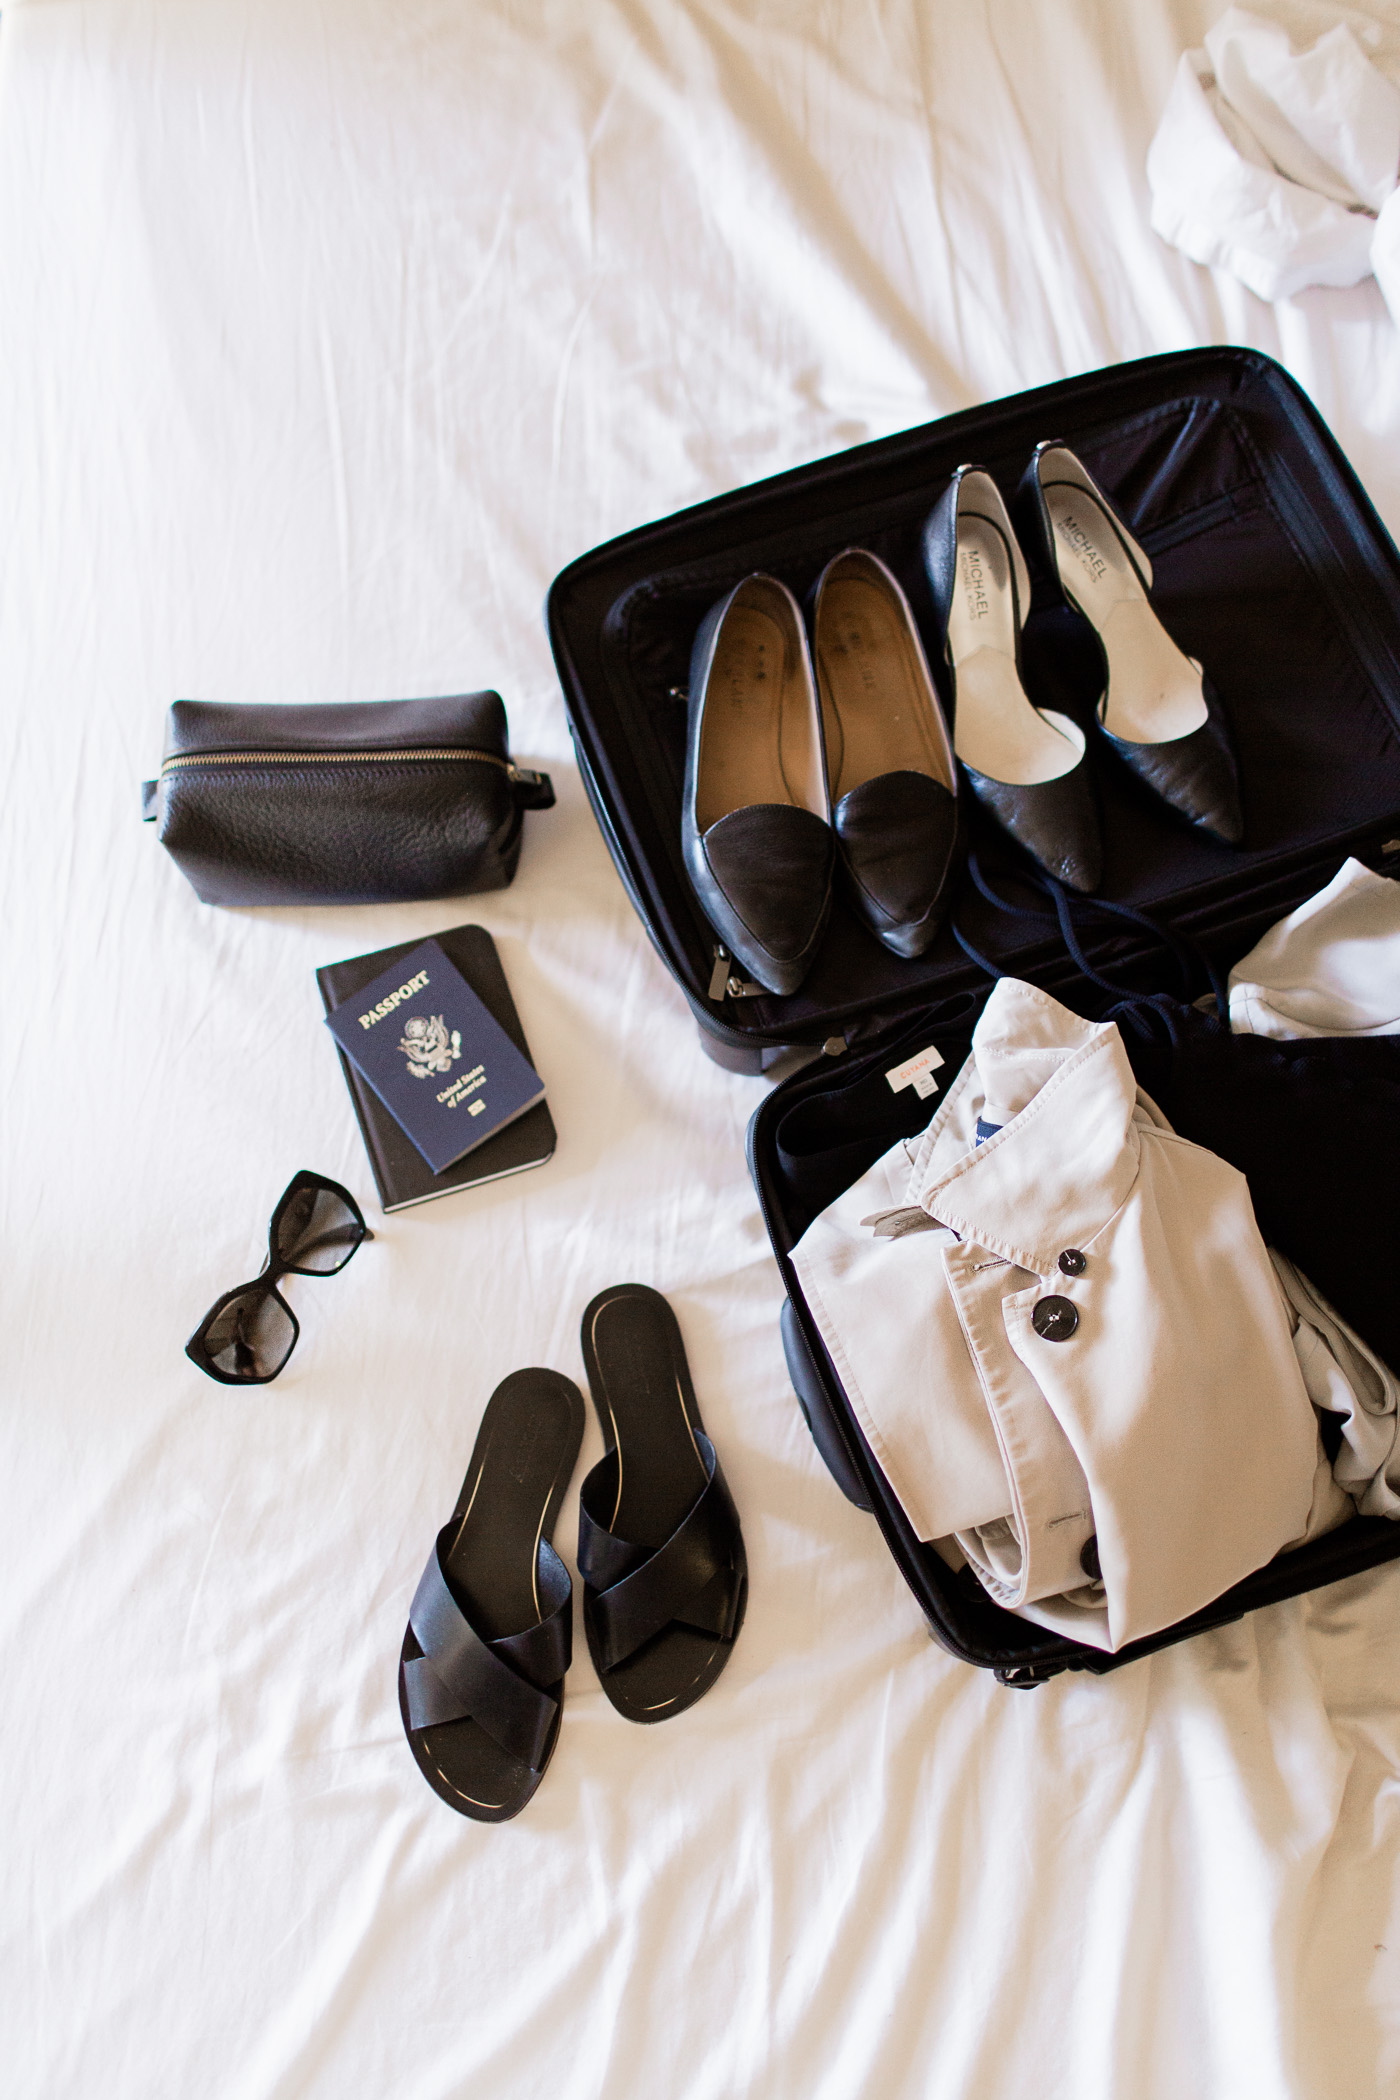 In my bag, packing for Vancouver, Canada